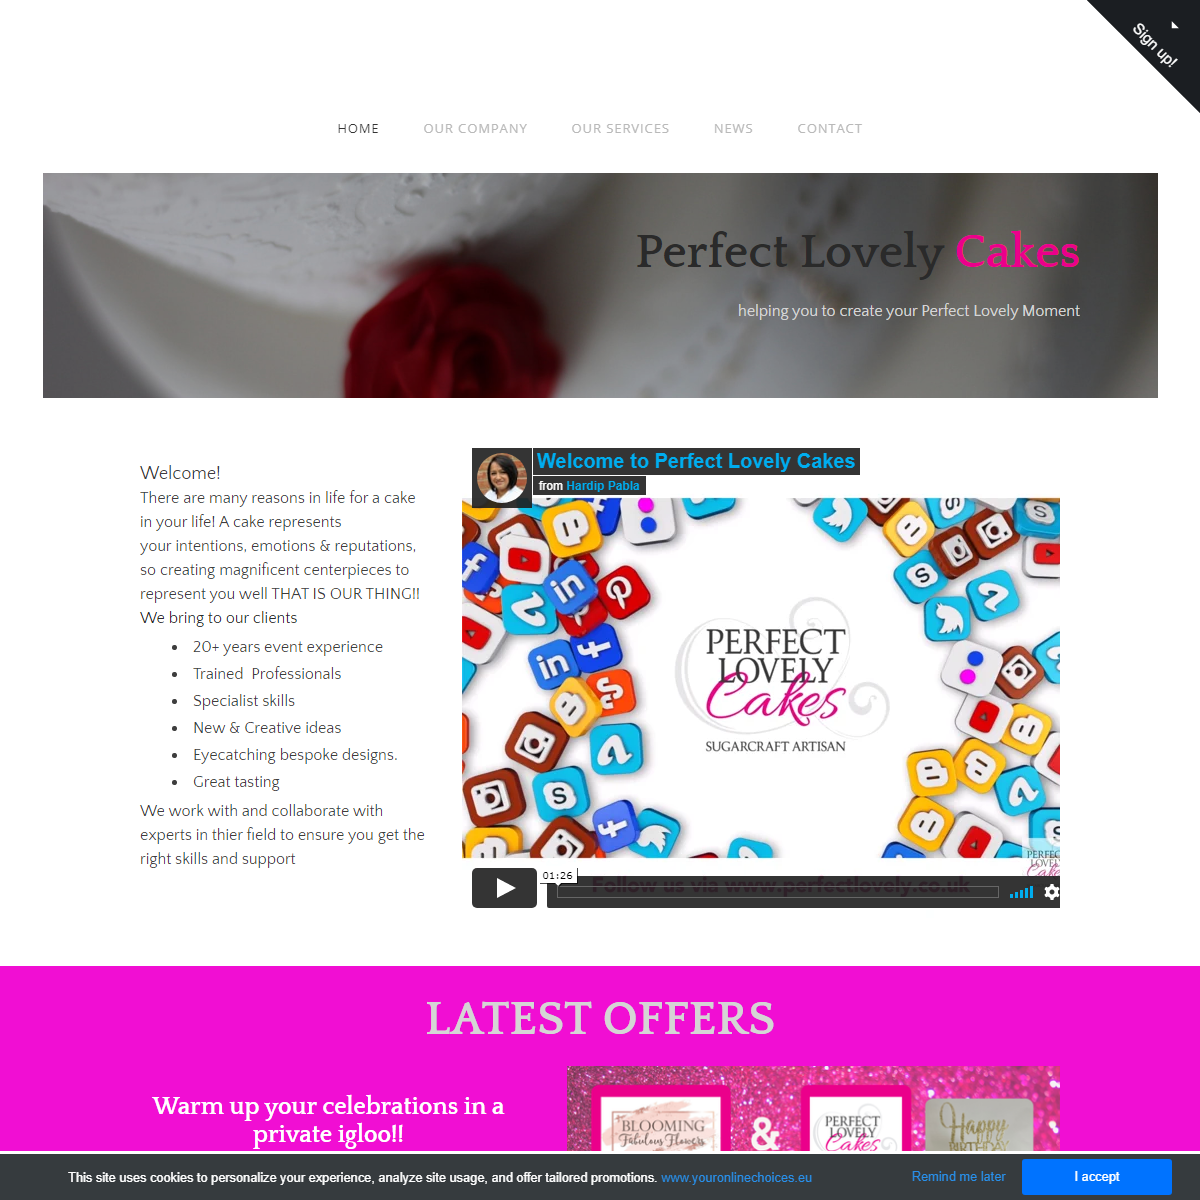 A complete backup of http://www.perfectlovely.co.uk/